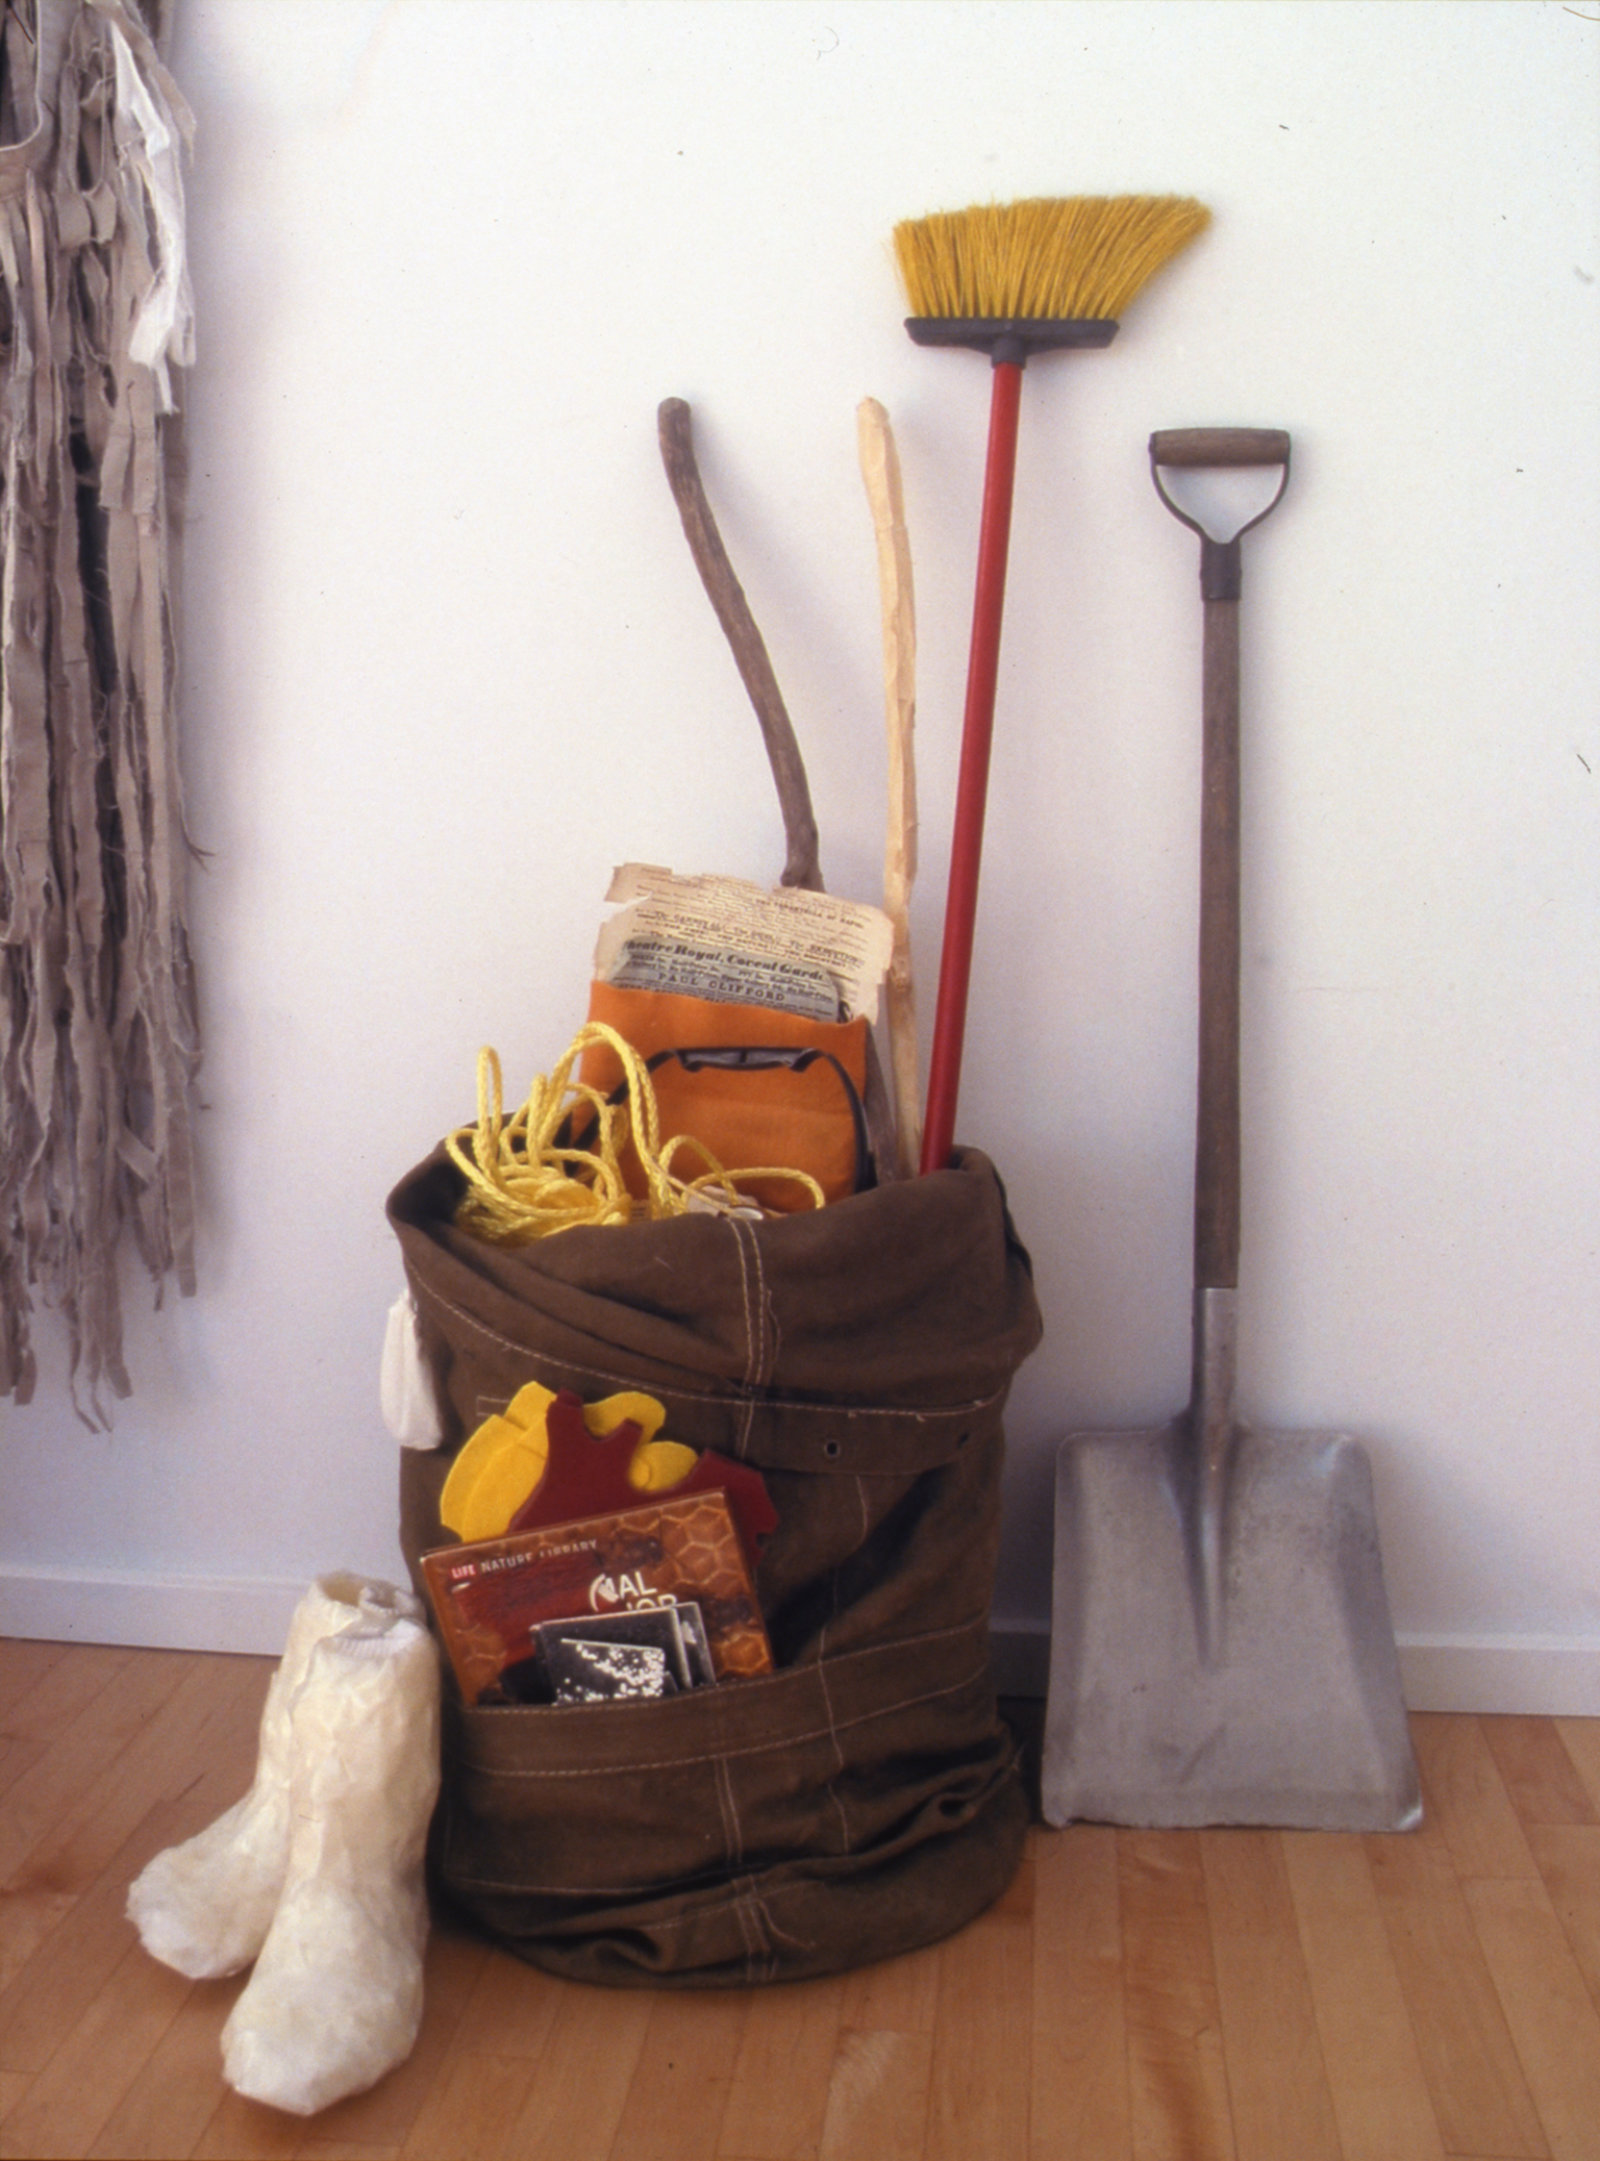 Geoffrey Farmer, Entrepreneur Alone Returning Back to Sculptural Form, 2002, mixed media, dimensions variable